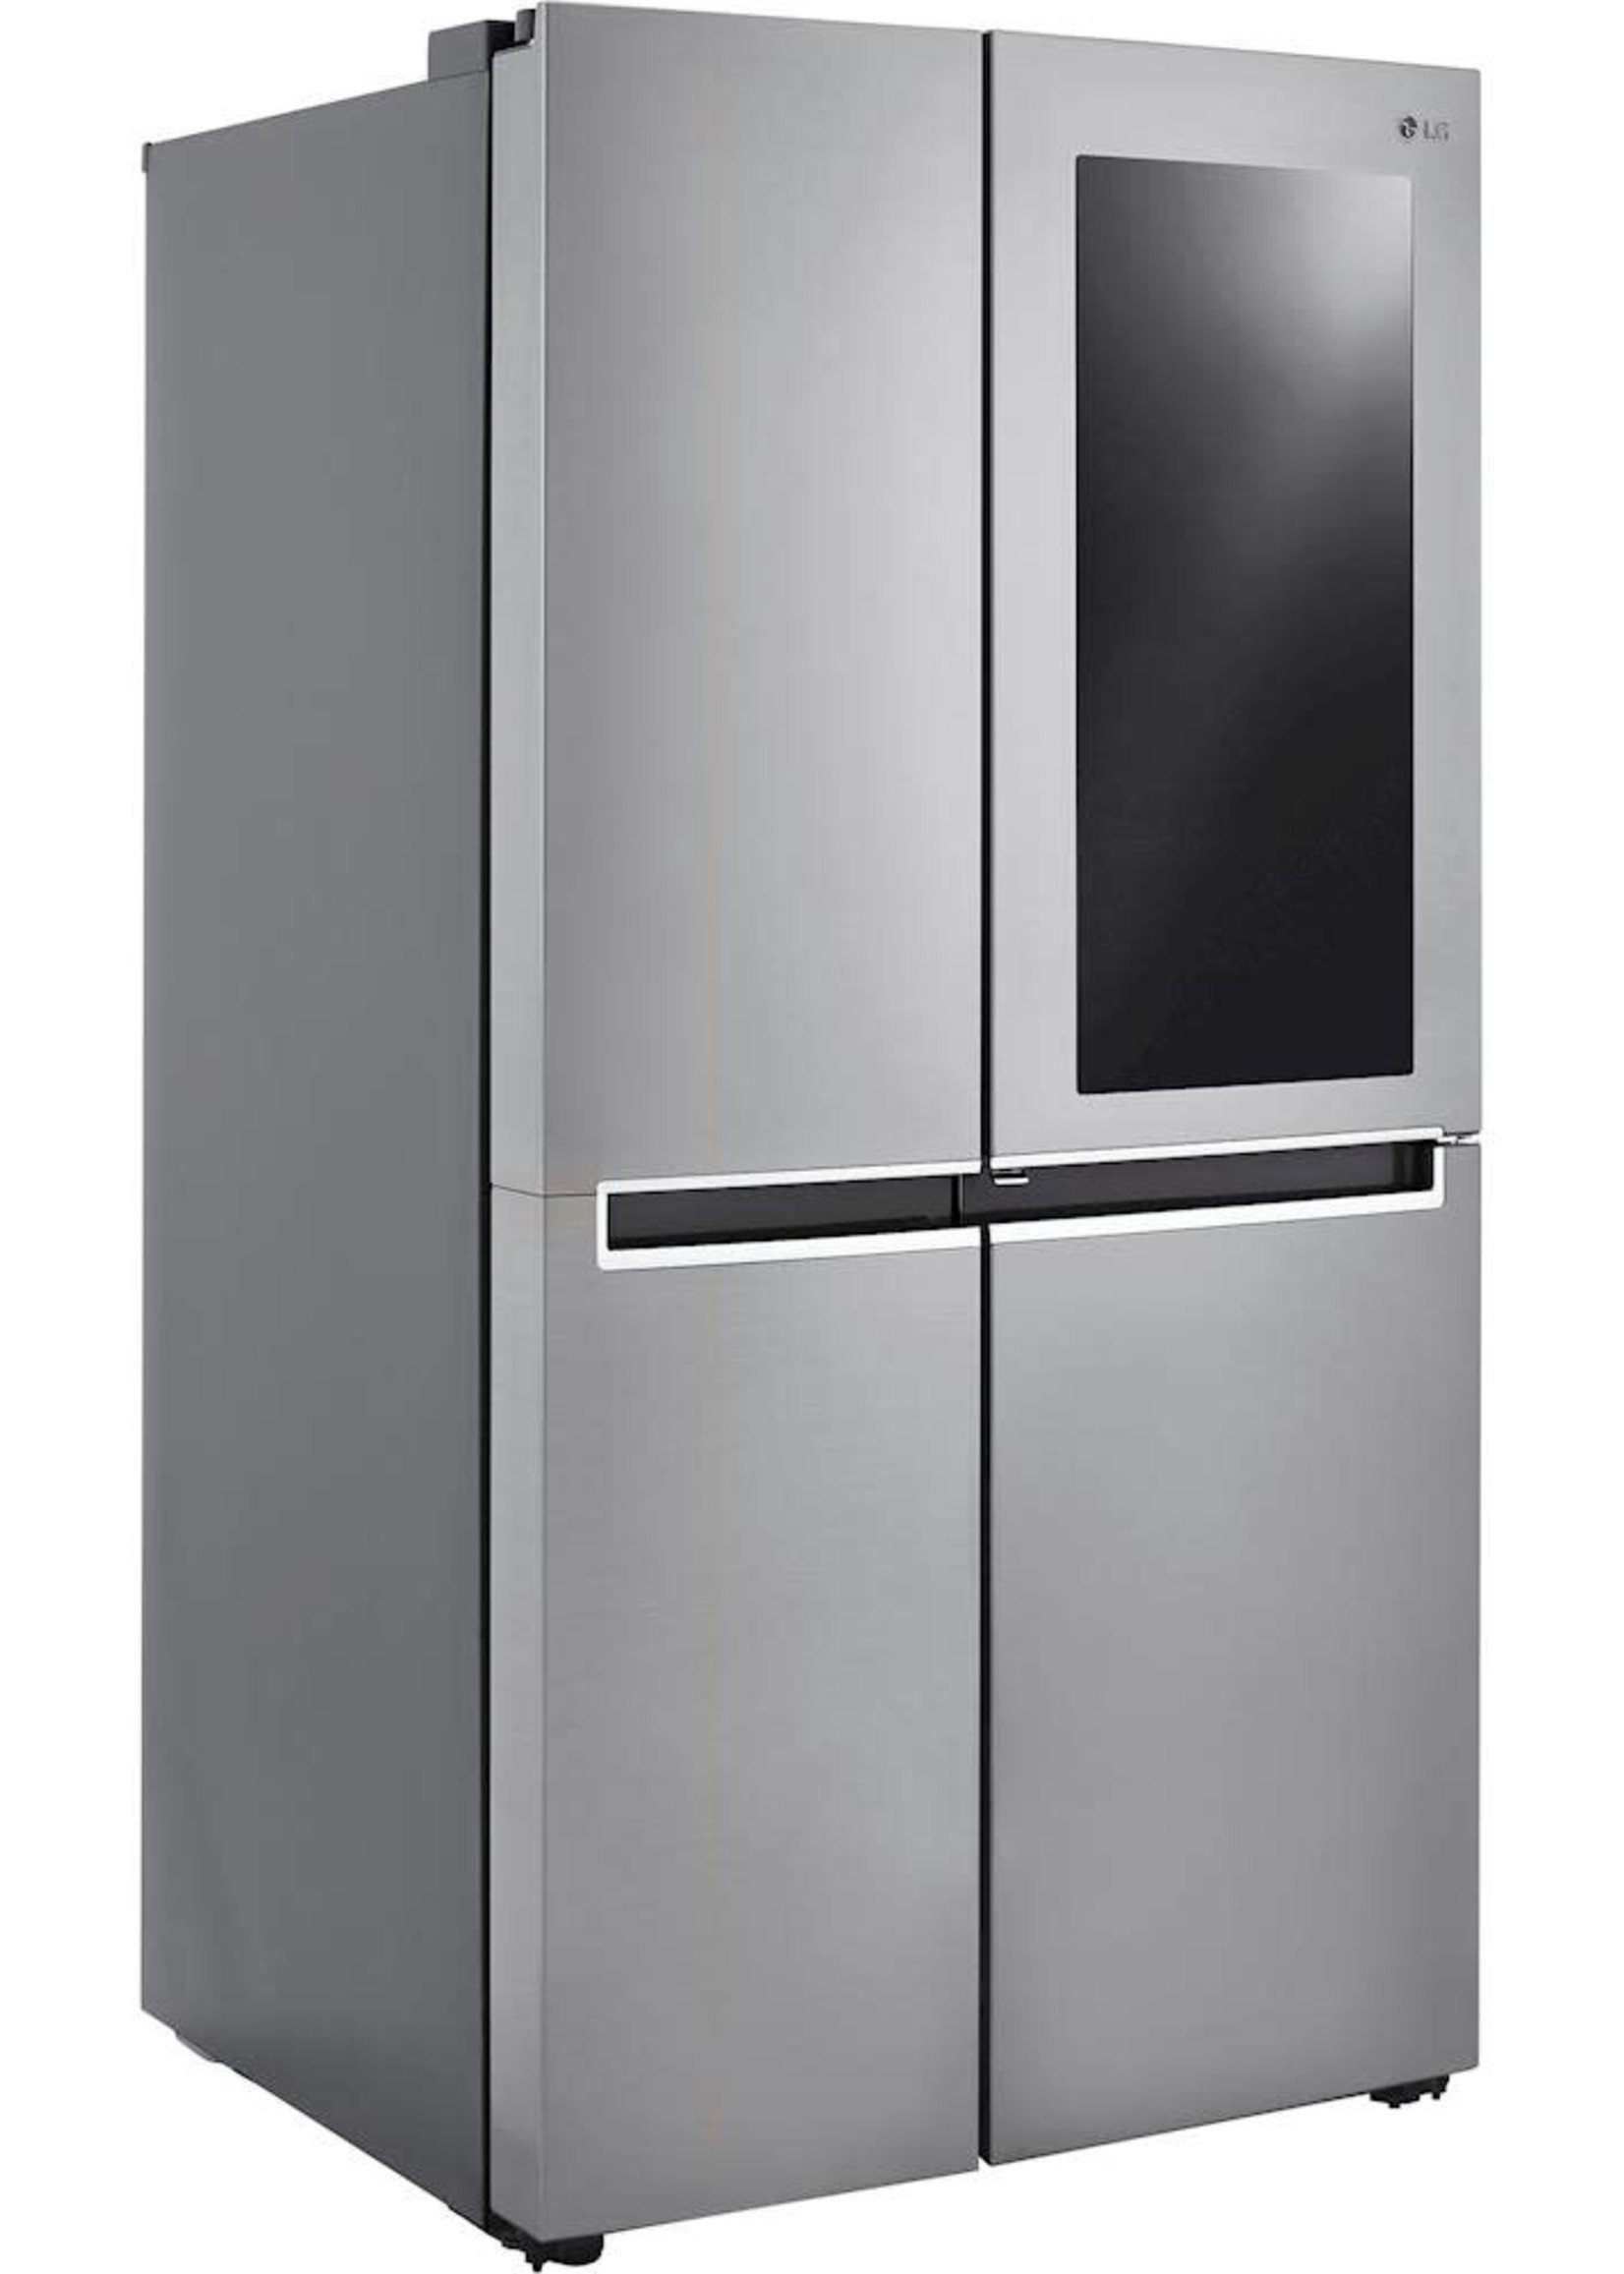 LG *LG LRSES2706V  26.8 cu. ft. Side by Side Refrigerator with InstaView Door-in-Door, Non-Dispenser with Pocket Handles in Platinum Silver